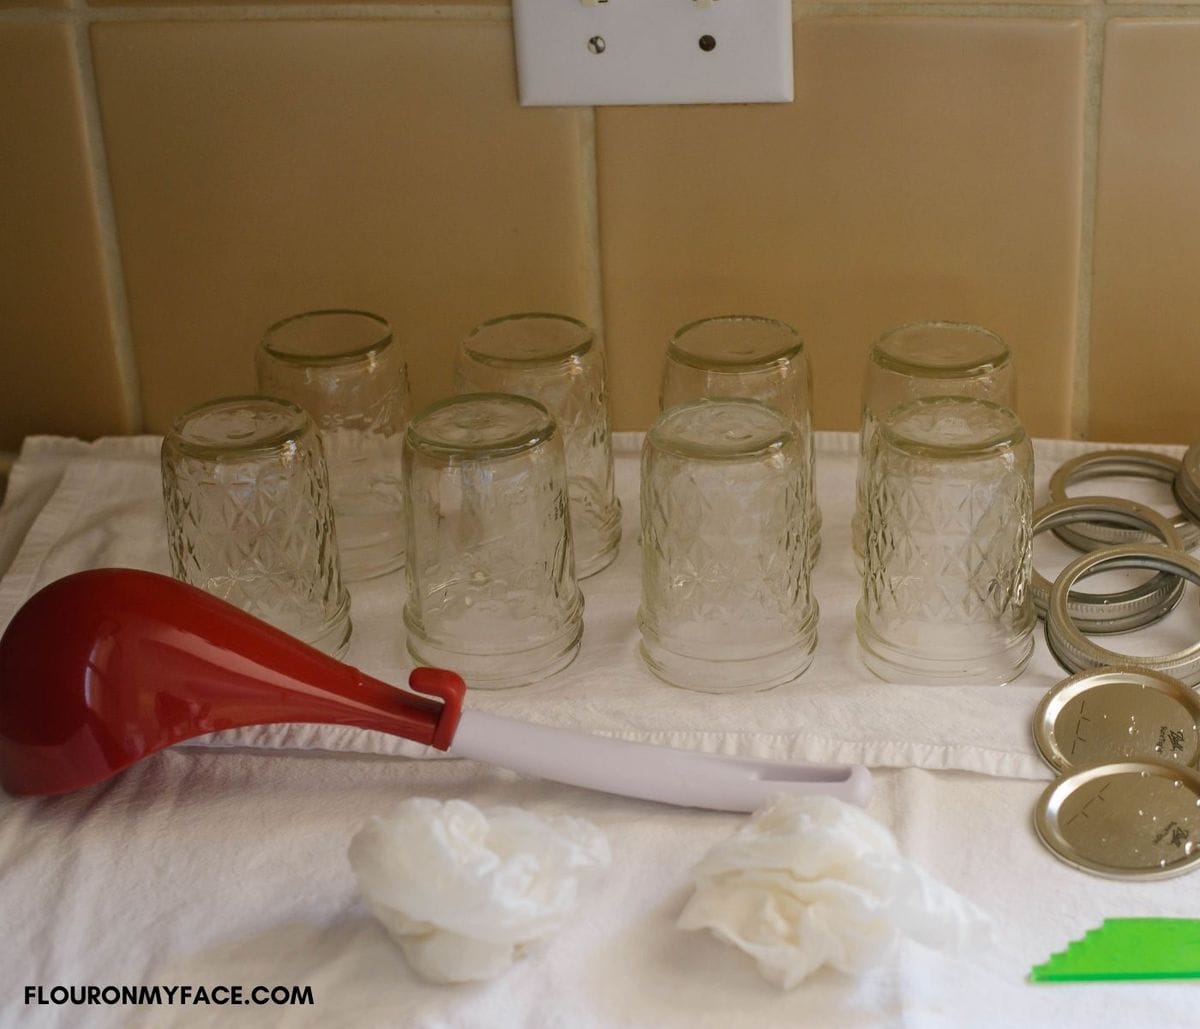 A canning station set up before starting with prepped jars and tools needed.